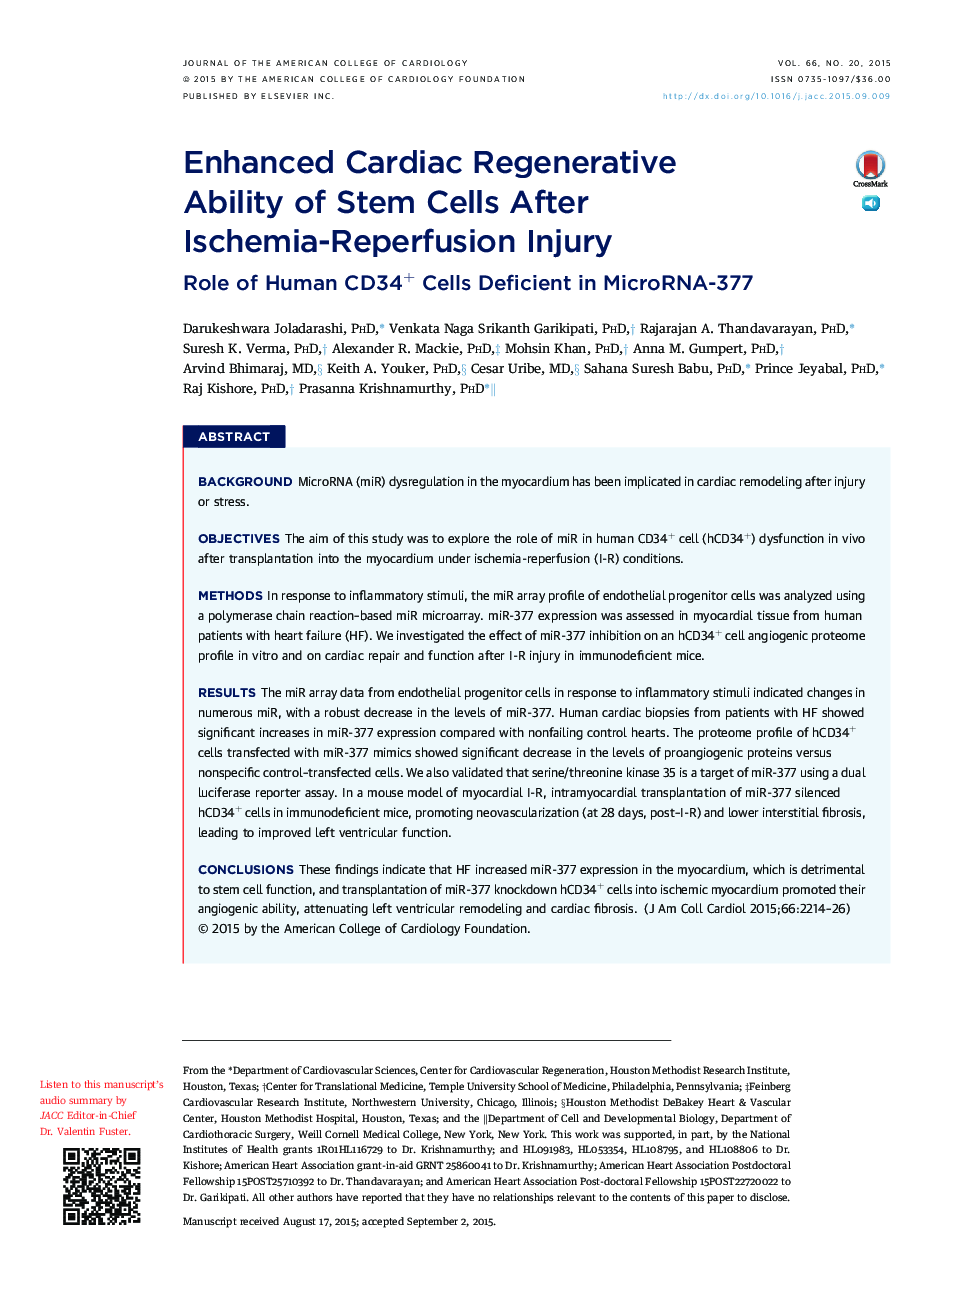 Enhanced Cardiac Regenerative Ability of Stem Cells After Ischemia-Reperfusion Injury: Role of Human CD34+ Cells Deficient in MicroRNA-377